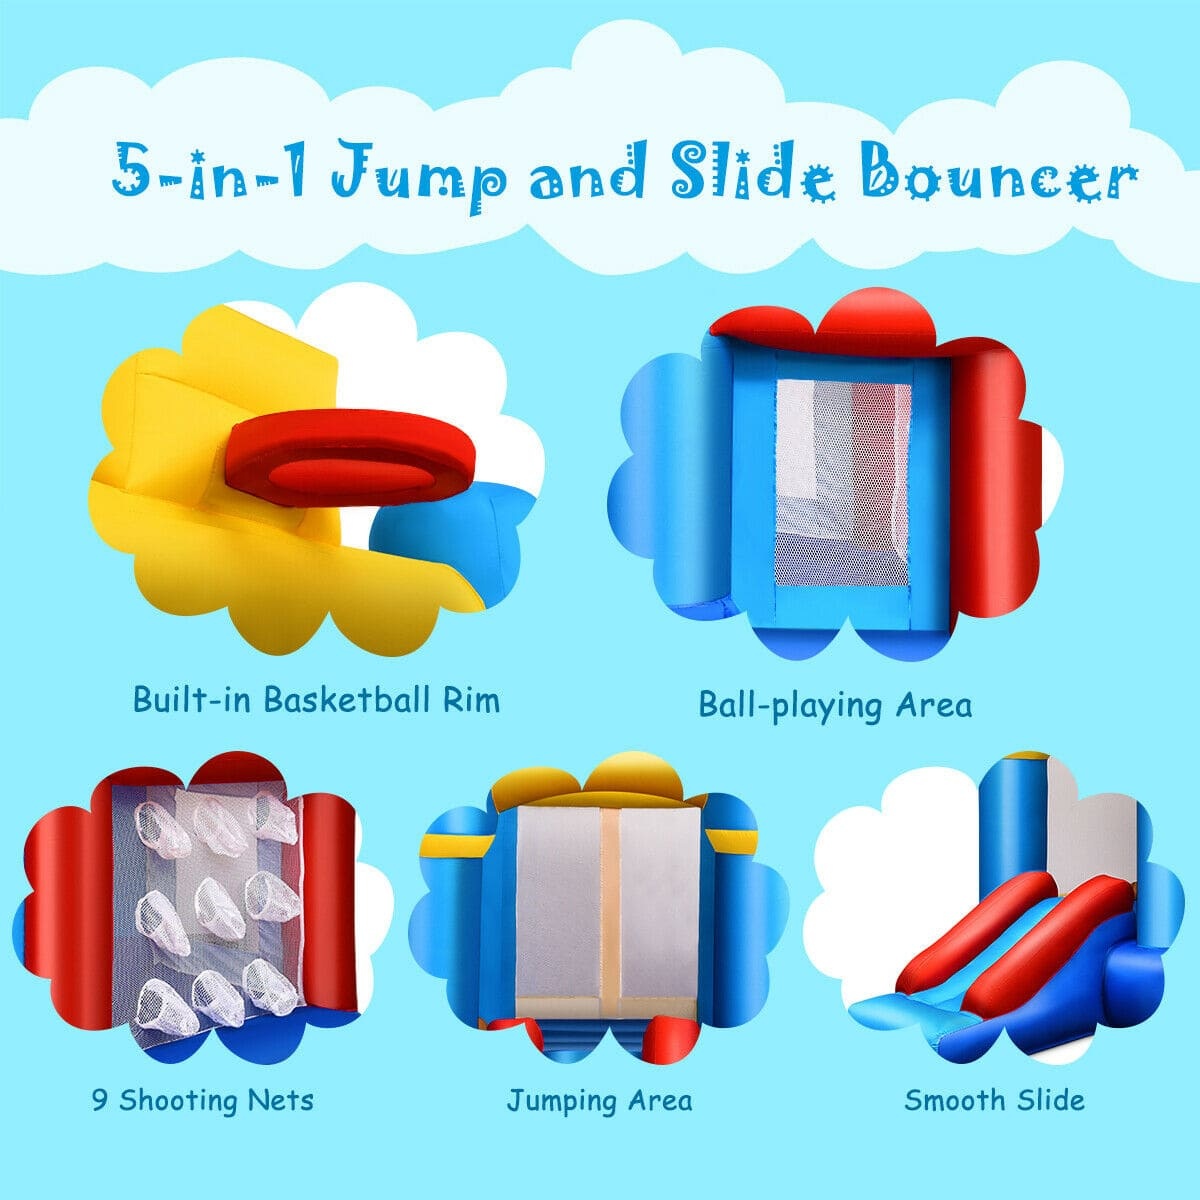 Inflatable Bounce House Castle with Balls & Bag - Blower not included